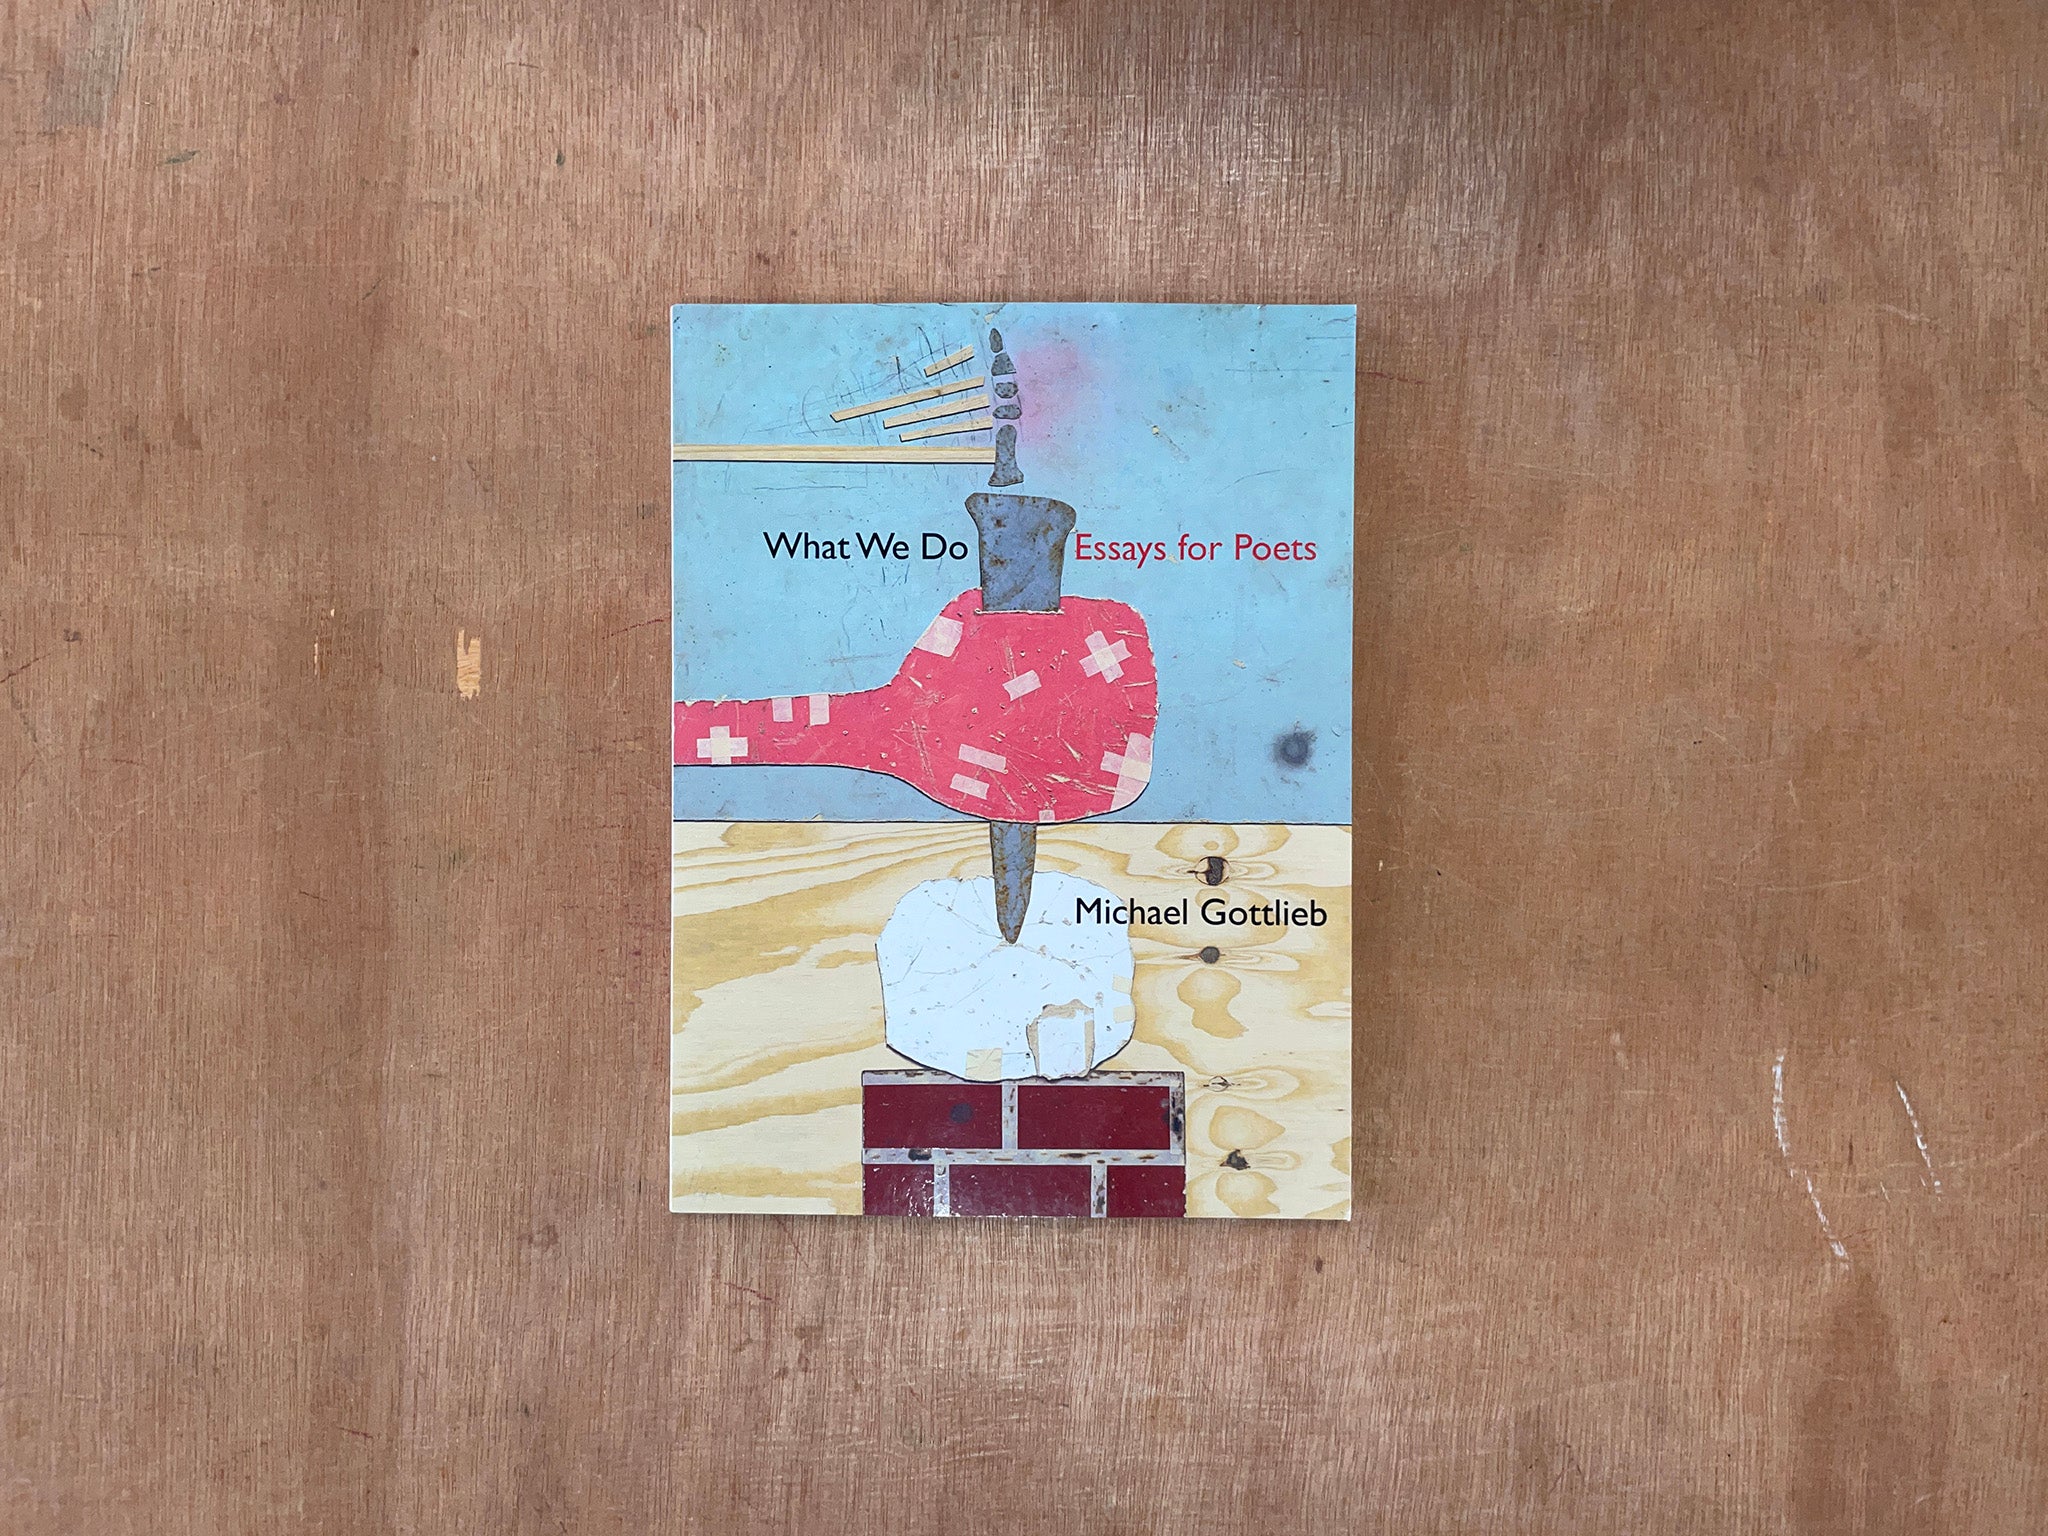 WHAT WE DO: ESSAYS FOR POETS by Michael Gottlieb